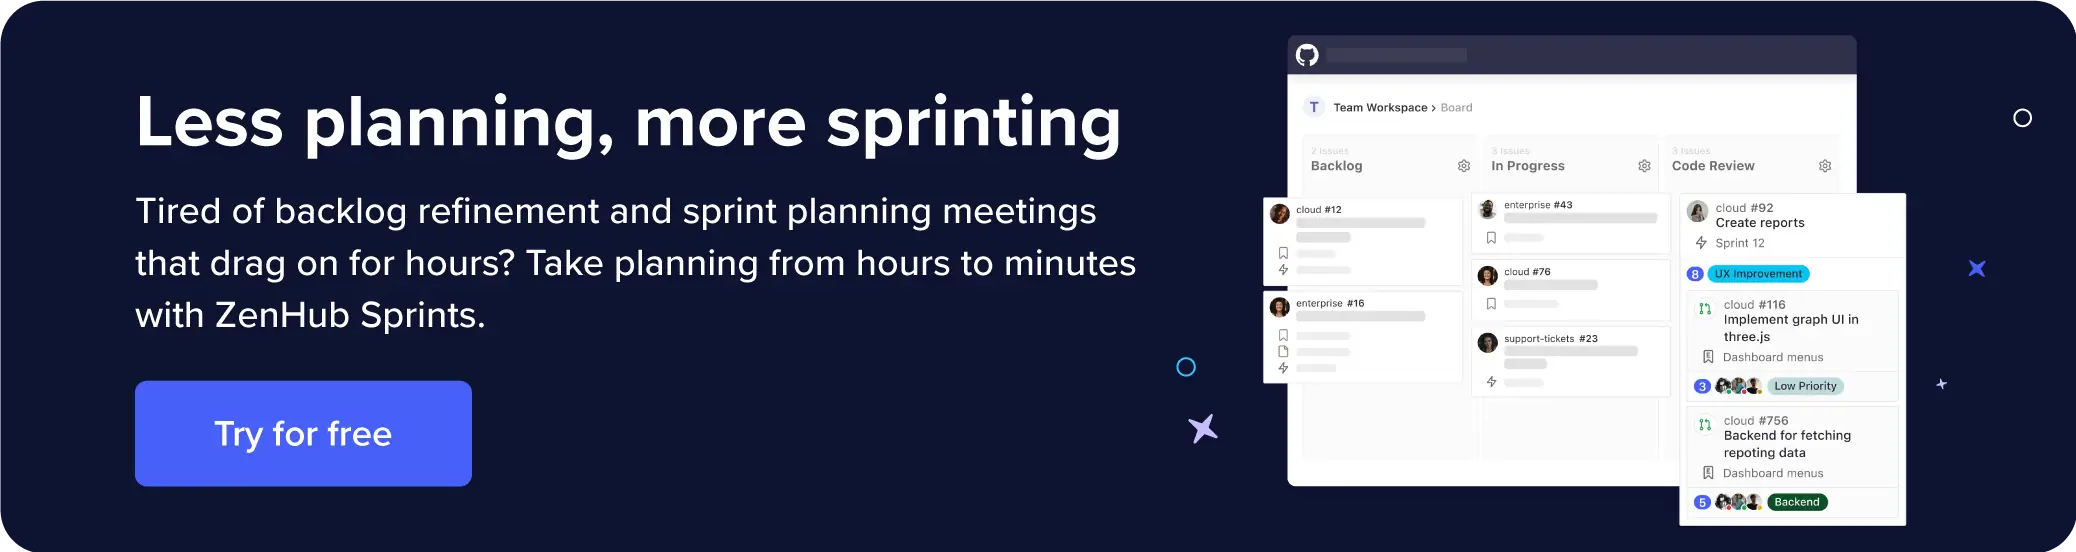 Goes over how to take sprint planning from hours to minutes with ZenHub Sprints.